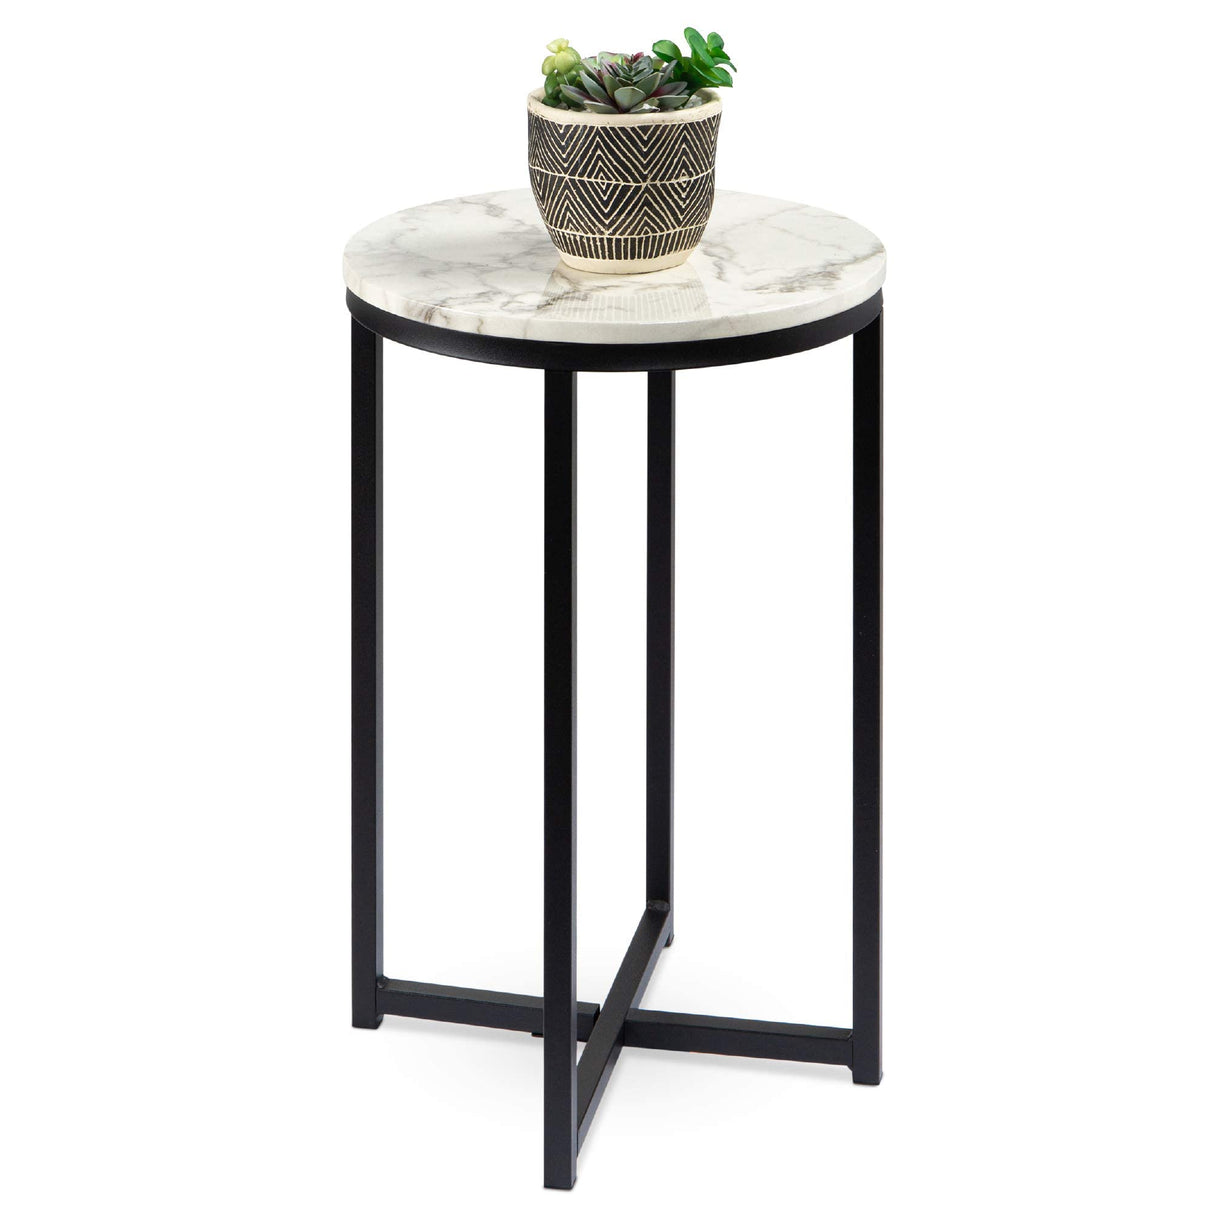 Best Choice Products 16in Faux Marble Accent Table, Modern End Table, Small Coffee Table Home Decor for Living Room, Dining Room, Tea, Coffee w/Metal Frame, Foot Caps, Designer - White/Matte Black